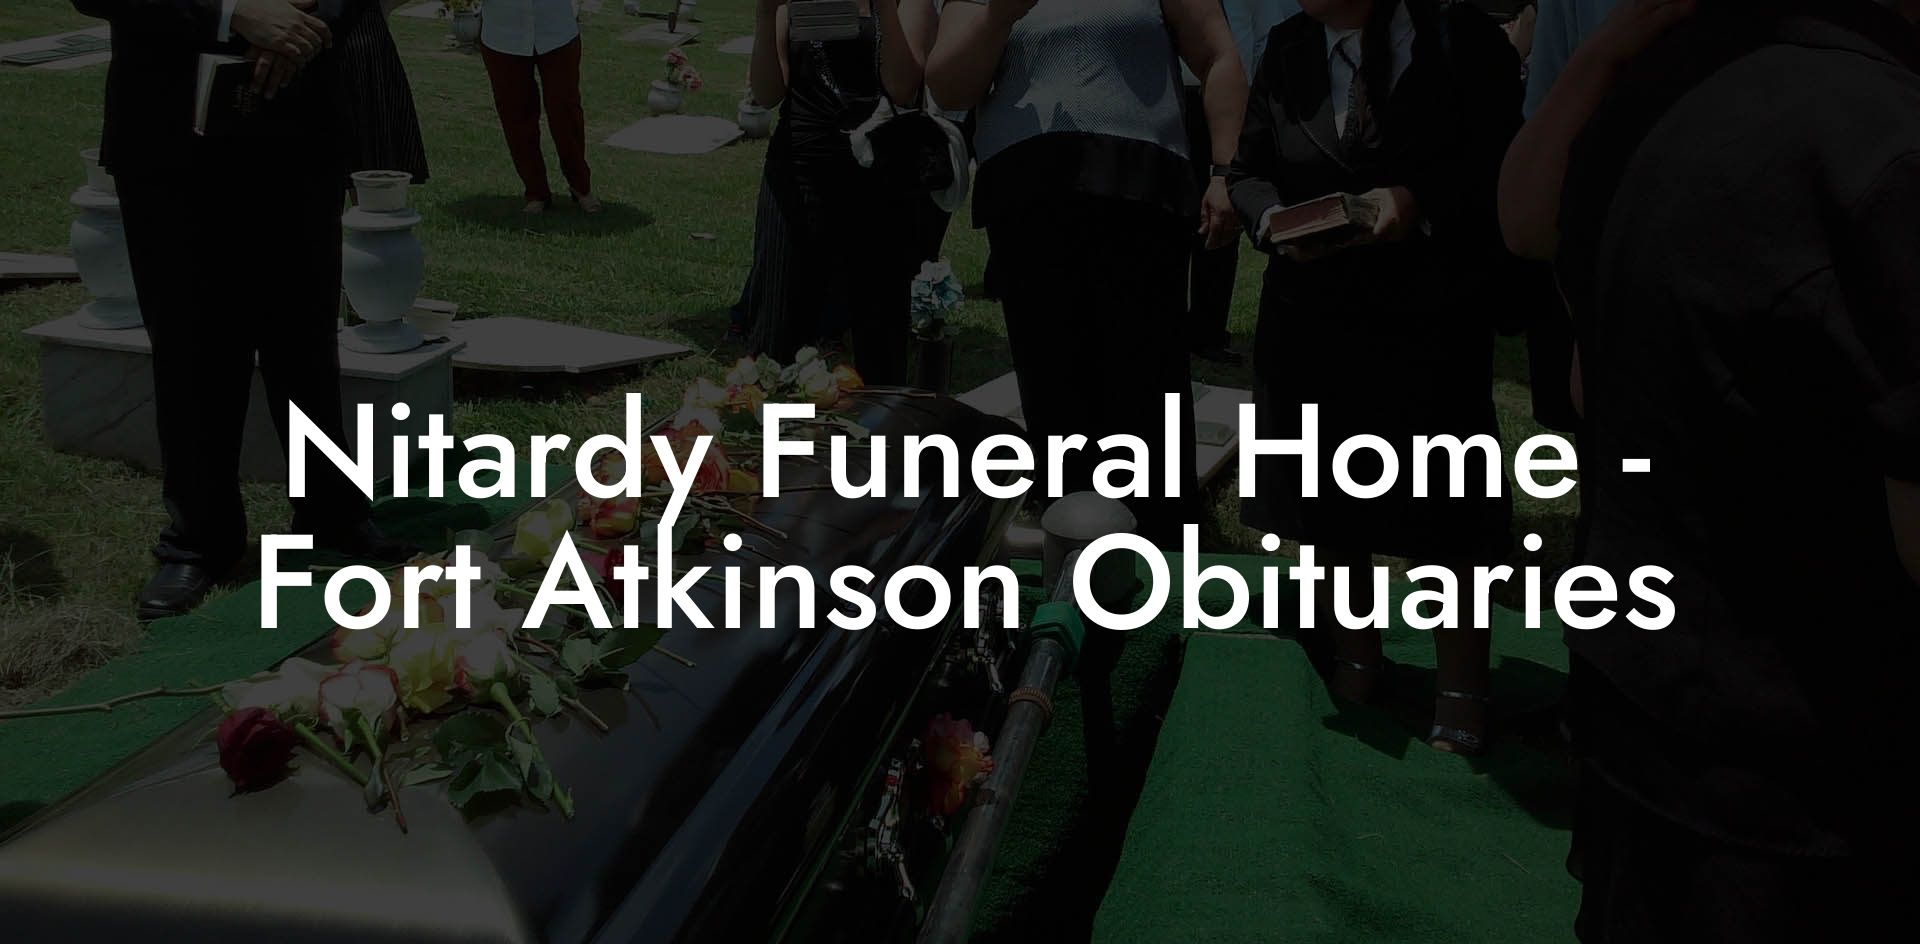 Nitardy Funeral Home - Fort Atkinson Obituaries